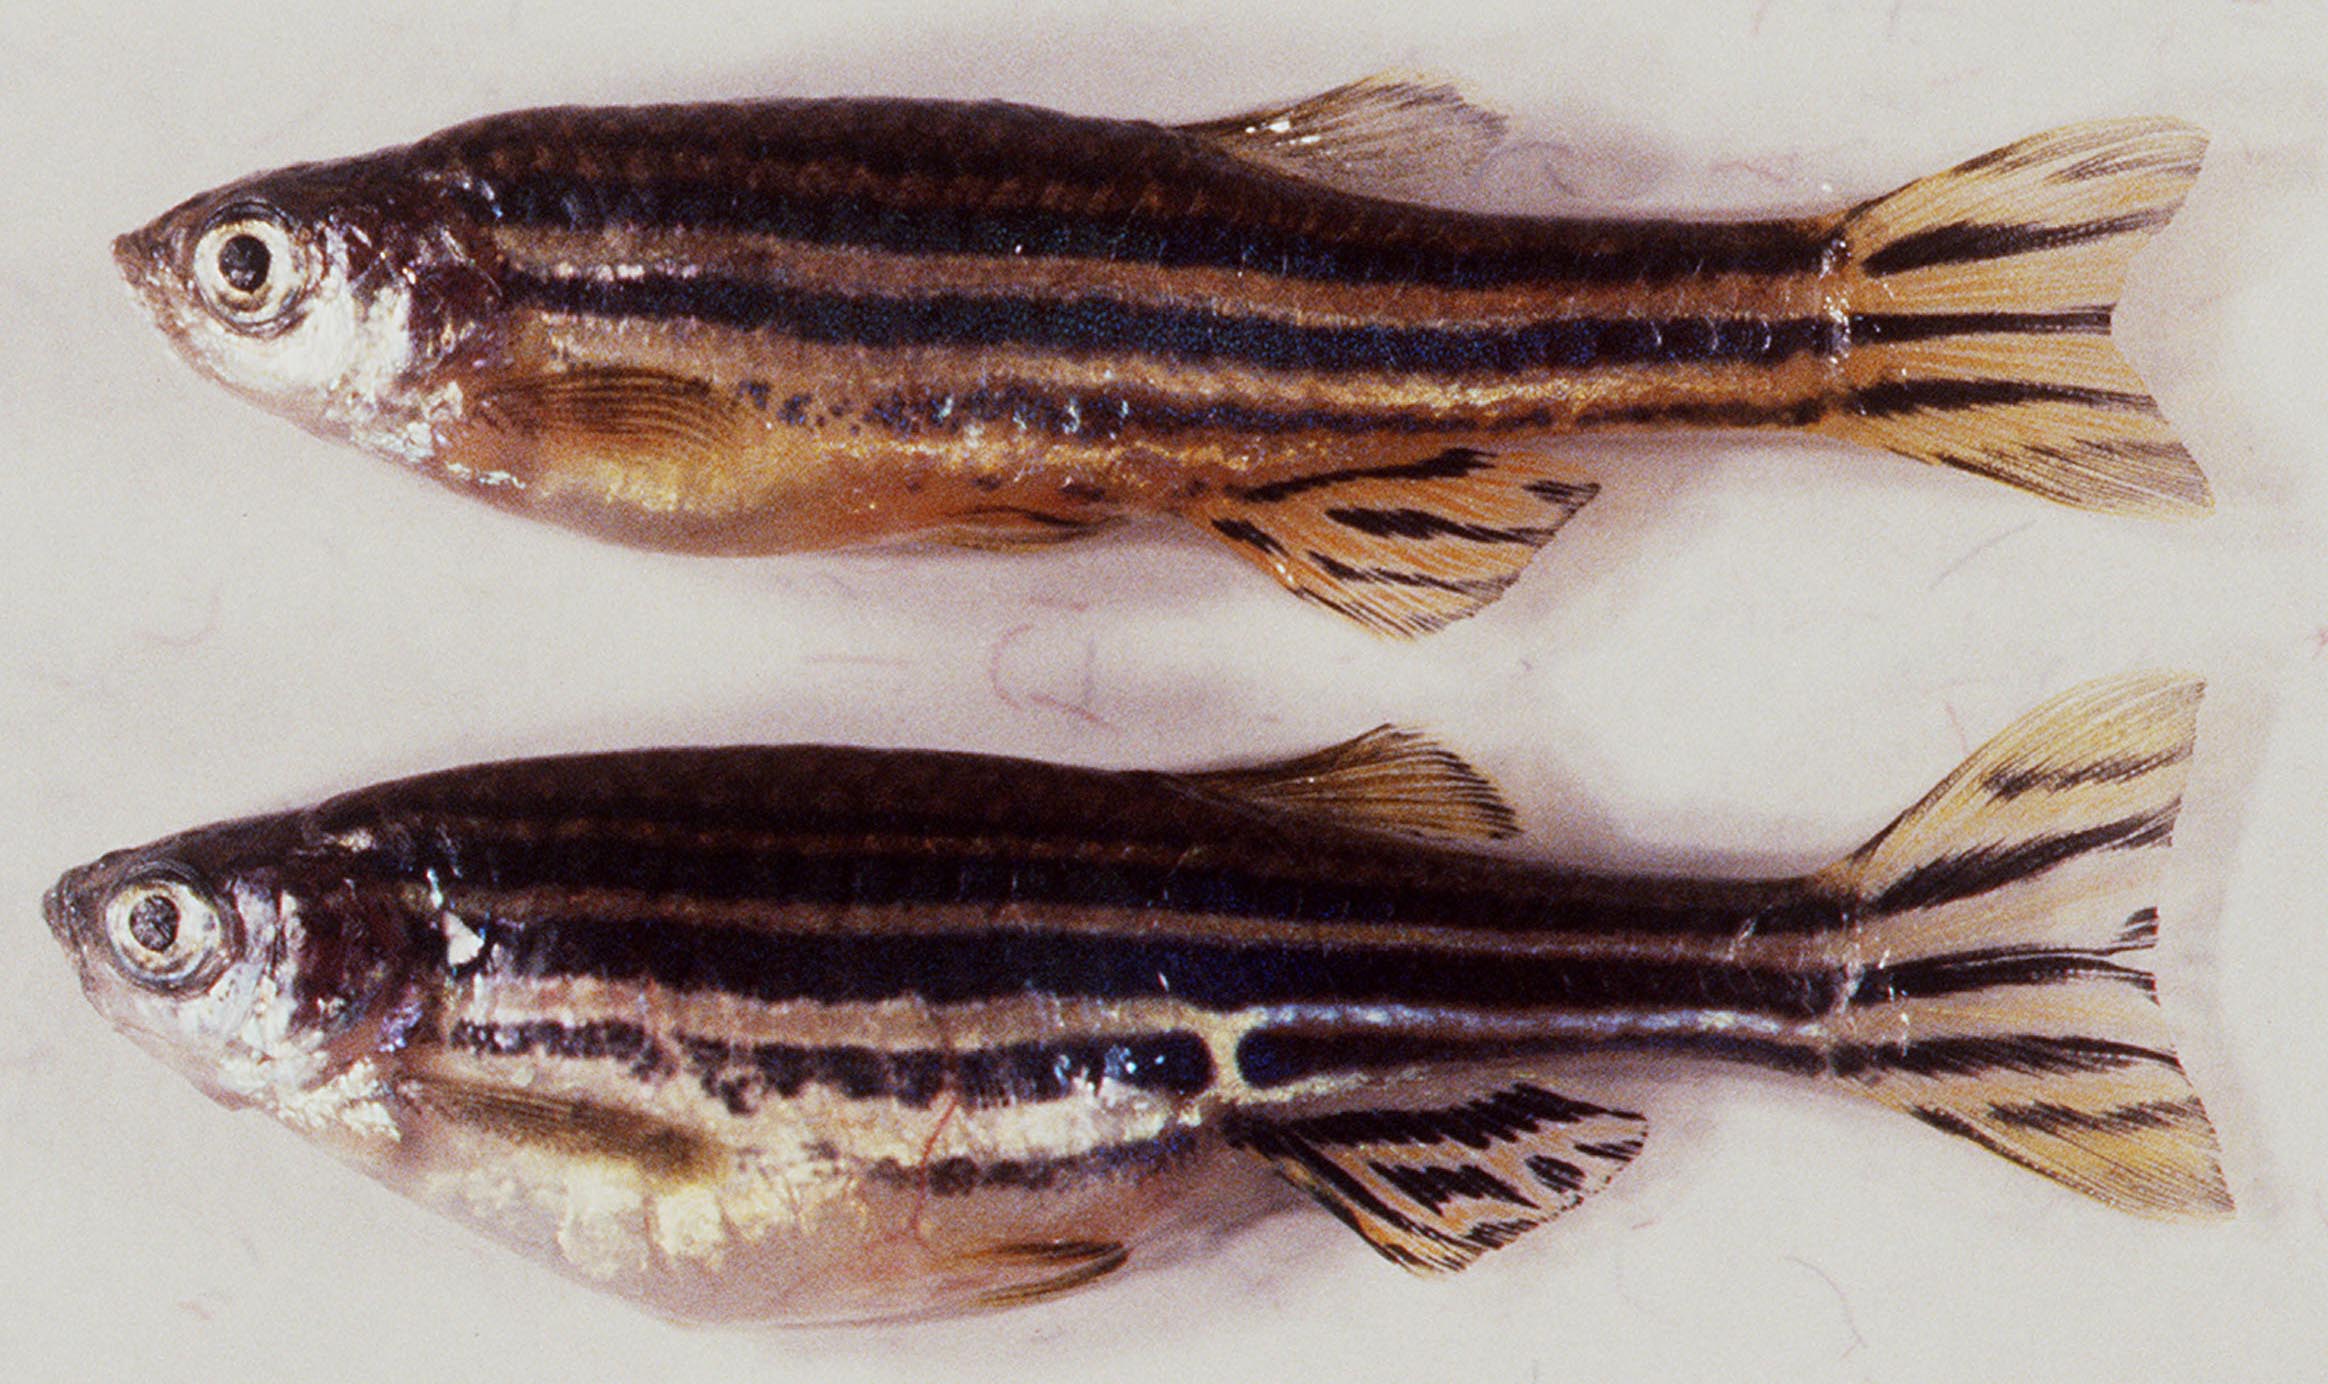 Lateral views of adult male (top) and female (bottom) zebrafish.